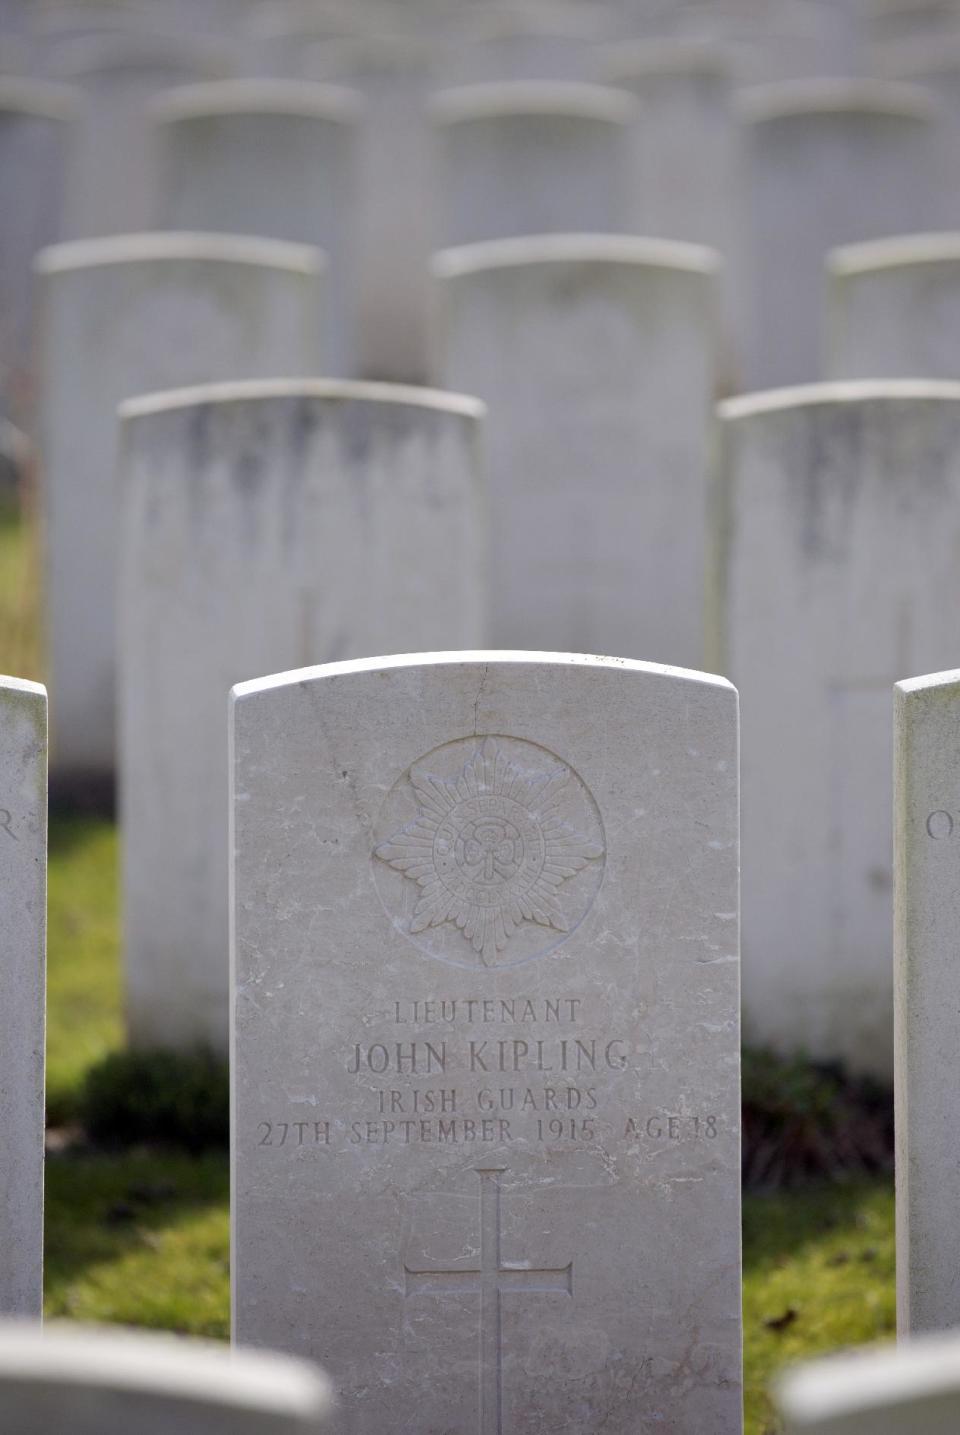 The gravestone of writer Rudyard Kipling's only son, Lt. John Kipling, stands among other World War One graves at St. Mary's Advanced Dressing Station Cemetery in Haisnes, France on Thursday, March 13, 2014. After his only son was killed in the Battle of Loos, Rudyard Kipling became an influential member of the Imperial War Graves Commission, later renamed the Commonwealth War Graves Commission, which established the standard gravestone of Portland stone, seen in Commonwealth cemeteries around the world. It was Kipling who suggested the phrase 'Their Name Liveth For Evermore' for memorial markers, and 'Known unto God', for the graves of those soldiers who bodies could not be identified. (AP Photo/Virginia Mayo)